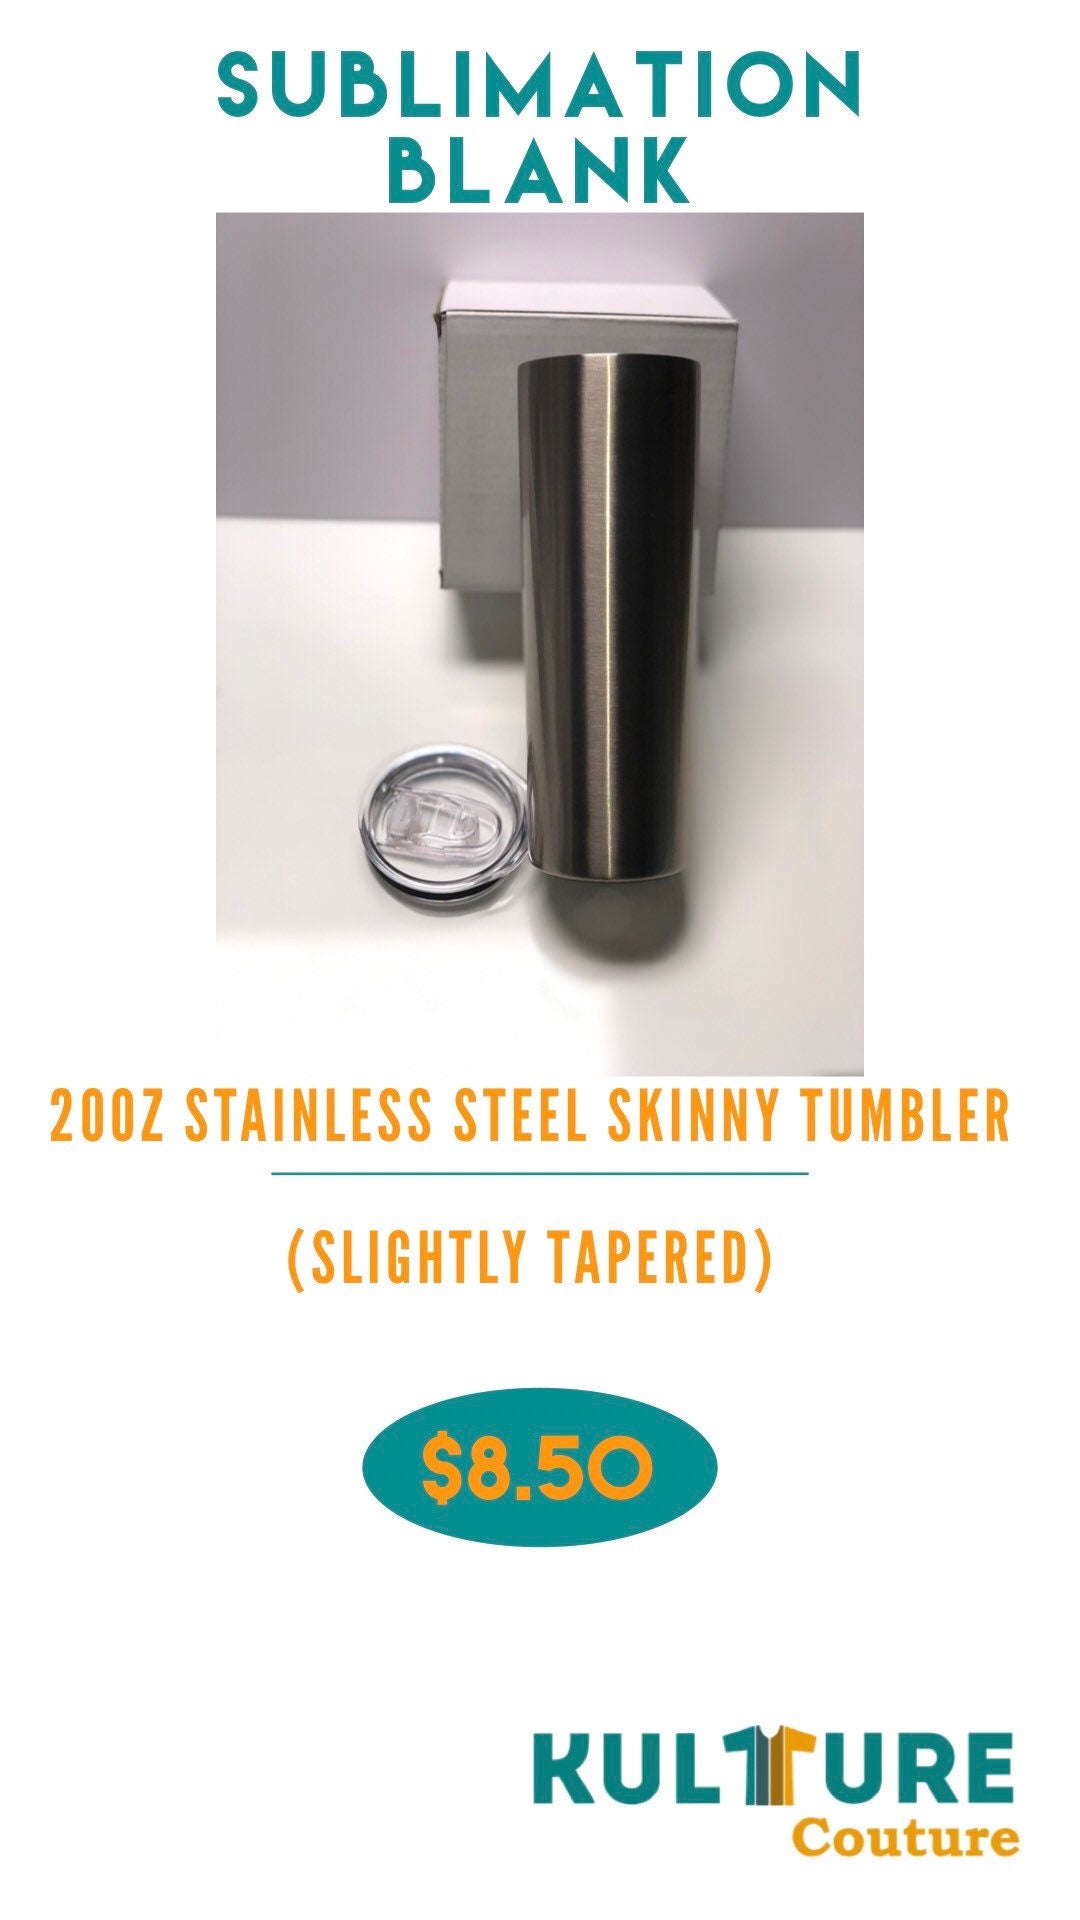 Sublimation Blank 20oz Stainless Steel Tumblers - White and Stainless Steel (Slightly Tapered) -READY TO SHIP